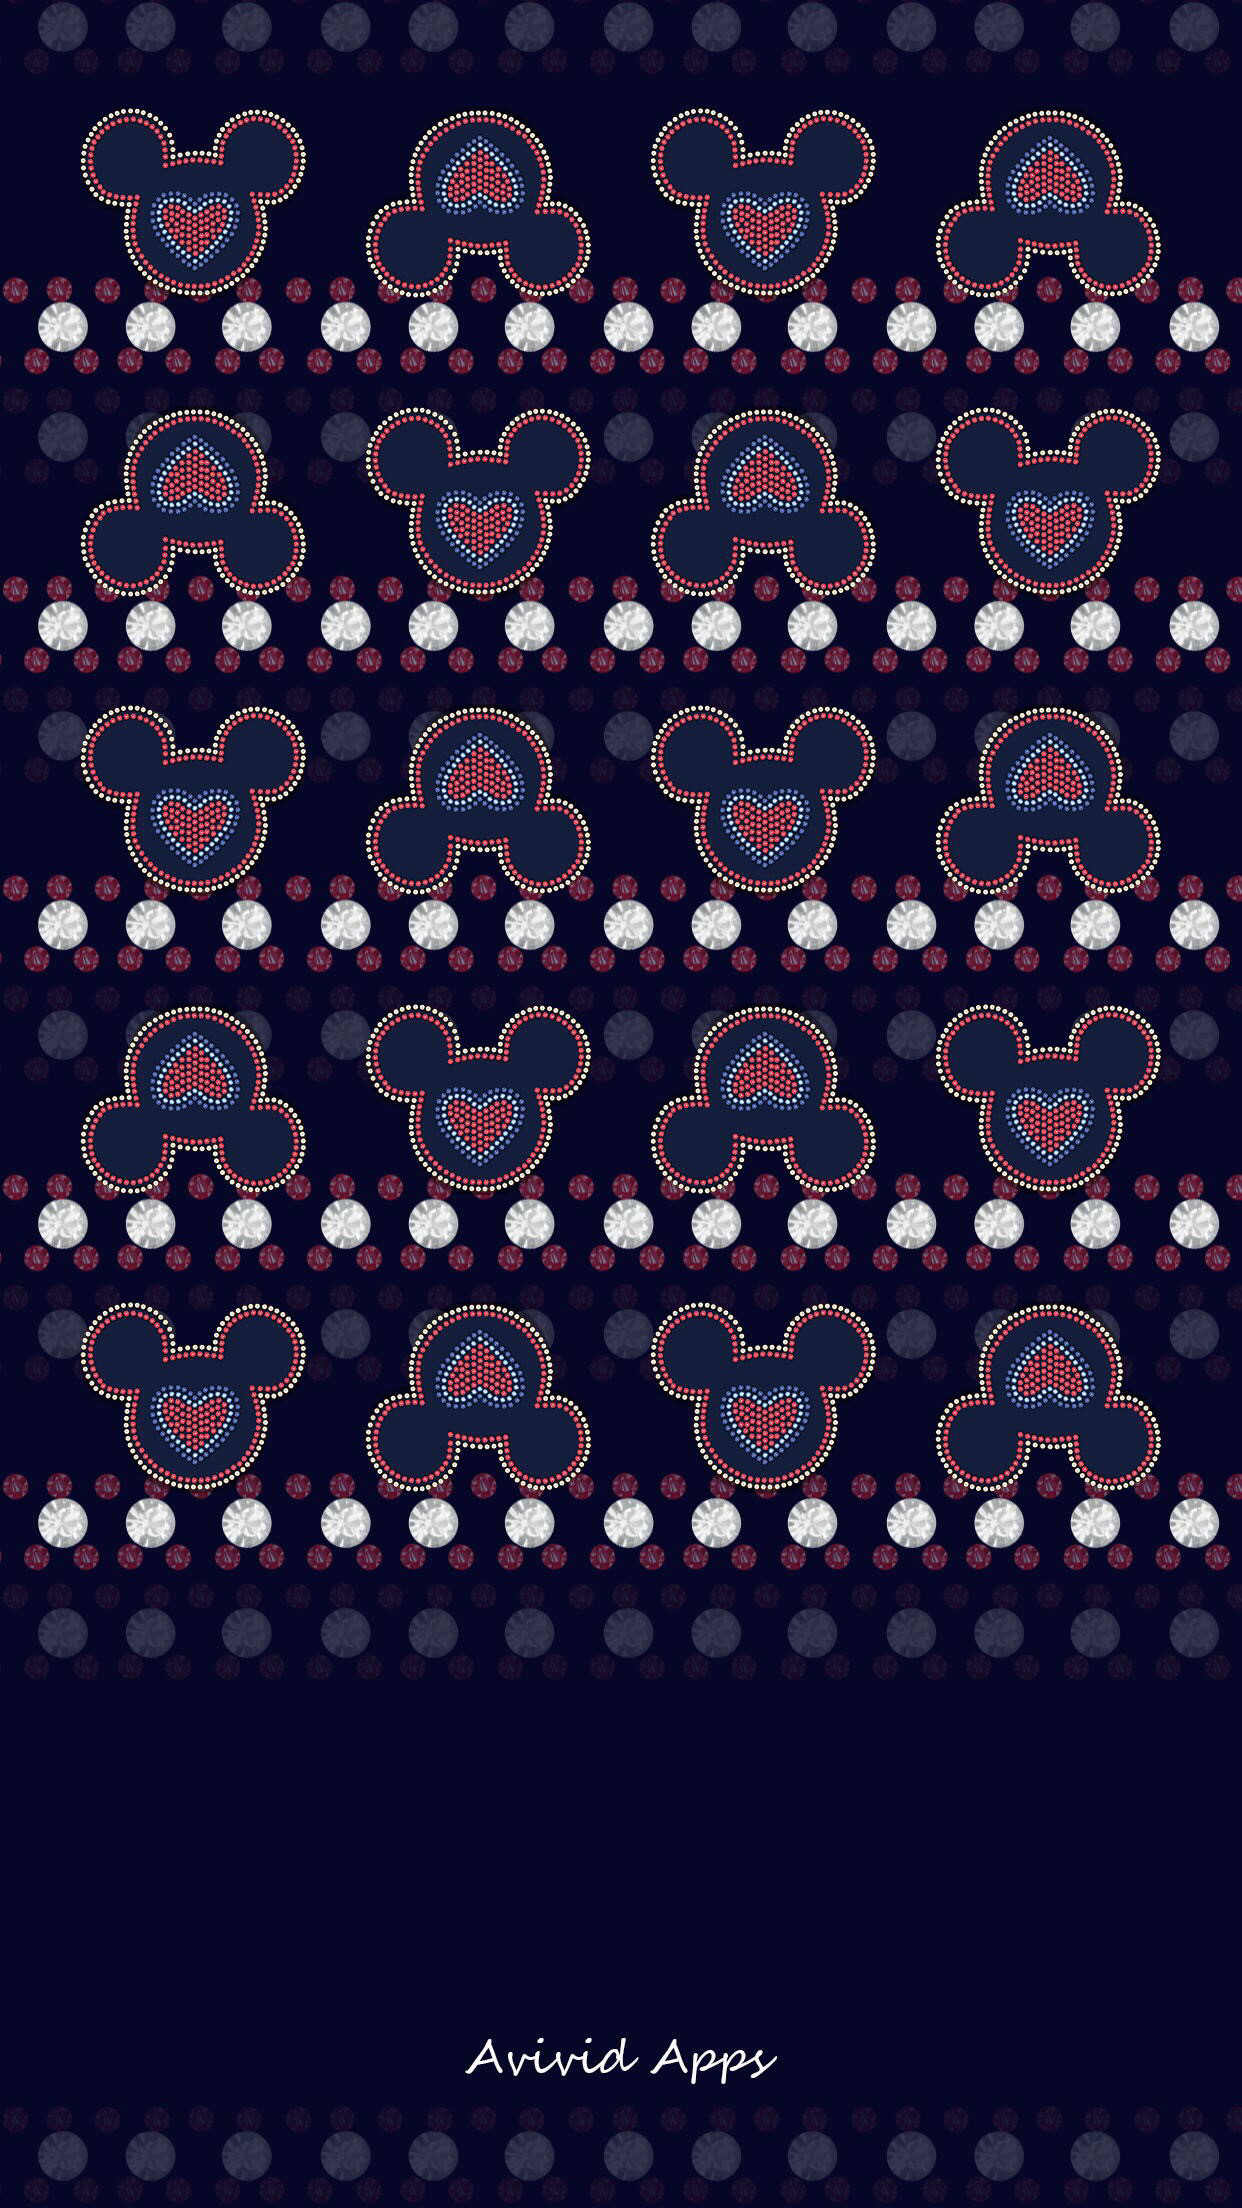 Iphone 6, Phone Wallpapers, Disney Inspired, Minnie Mouse, Hello Kitty, Walls, Nails, Prints, Funds